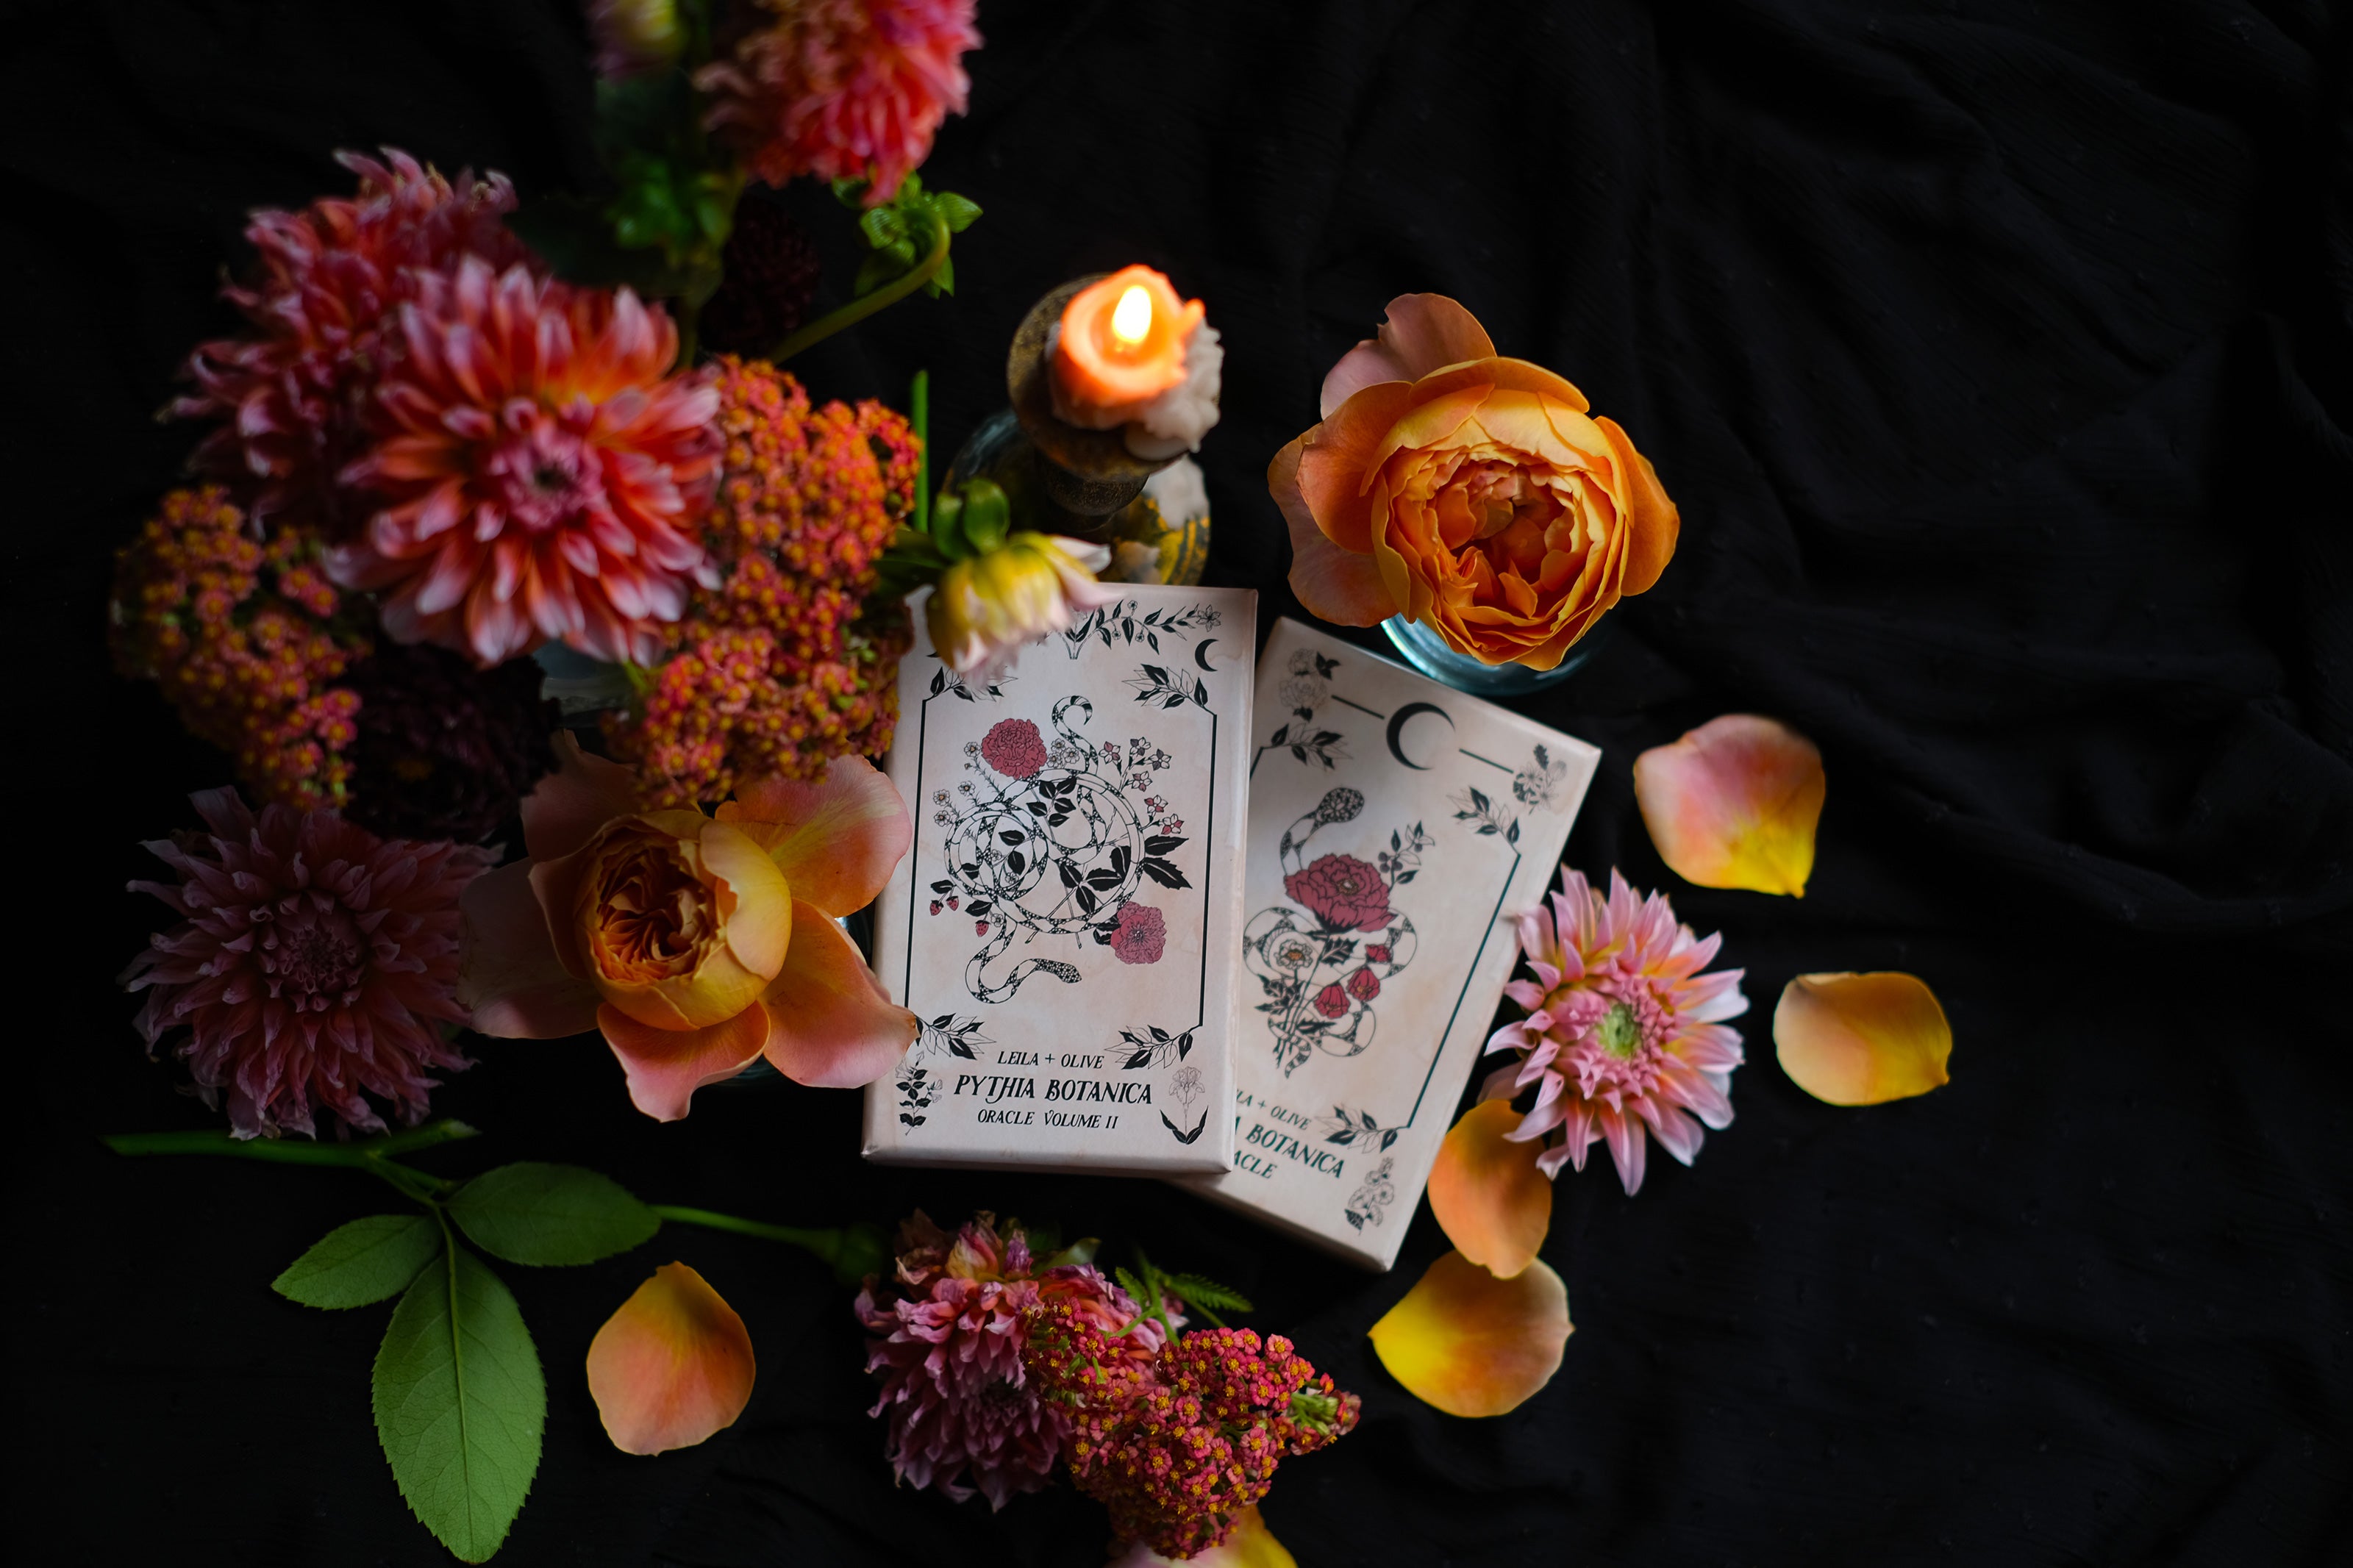 The Botanical Oracle decks. Each of these plant and flora inspired, intuitive tarot card decks delve into the garden and the natural world while remaining rooted in mythology and tradition.